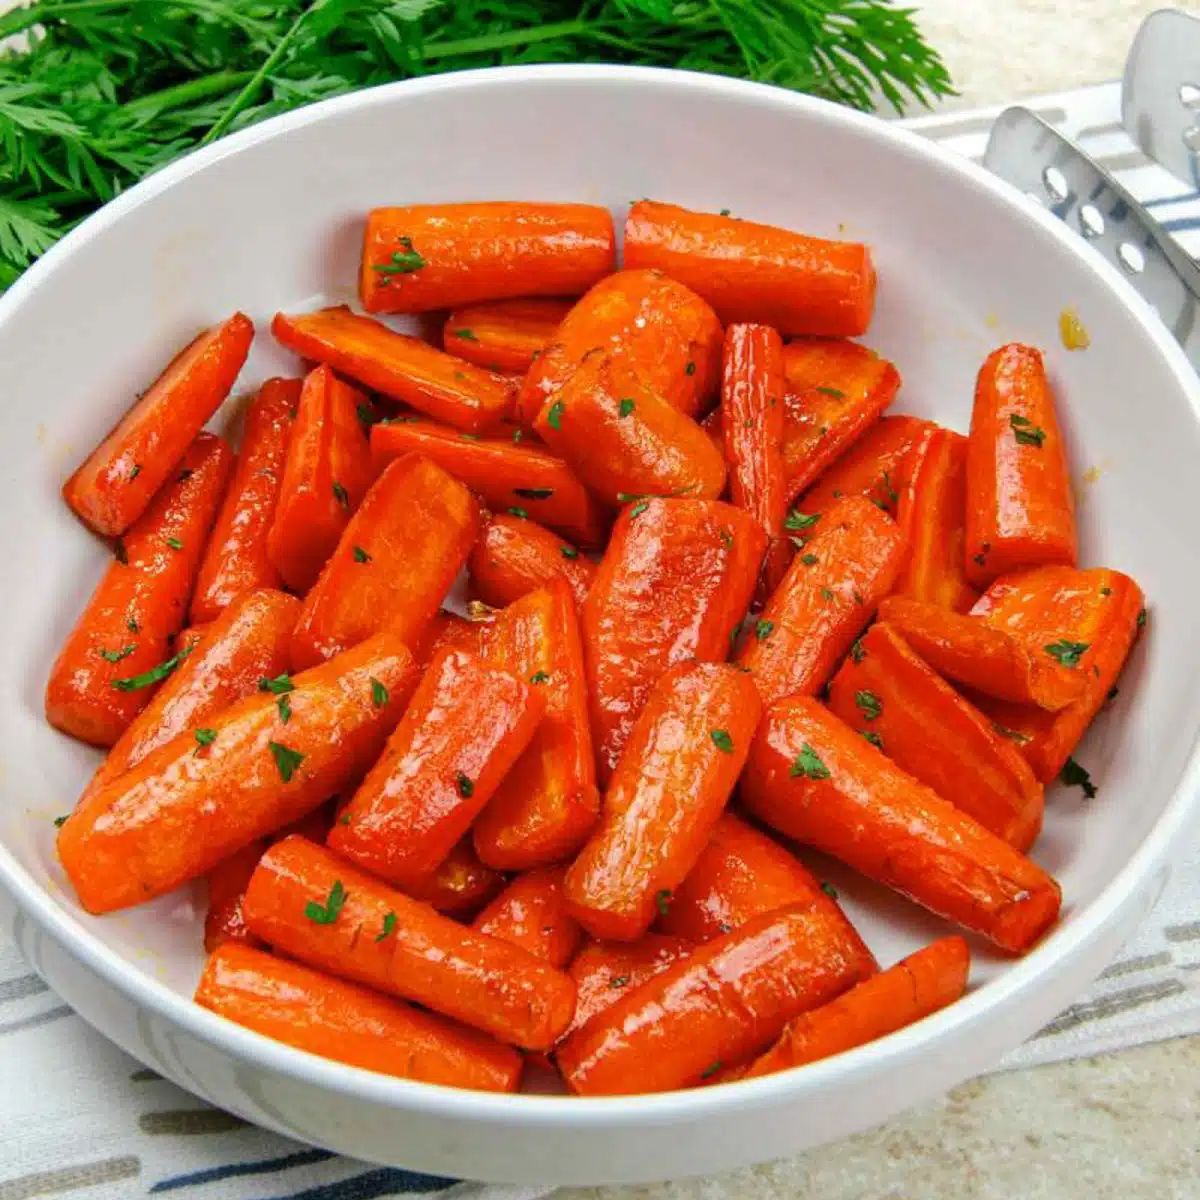 A bowl of honey brown sugar glazed carrots with a little parsley.